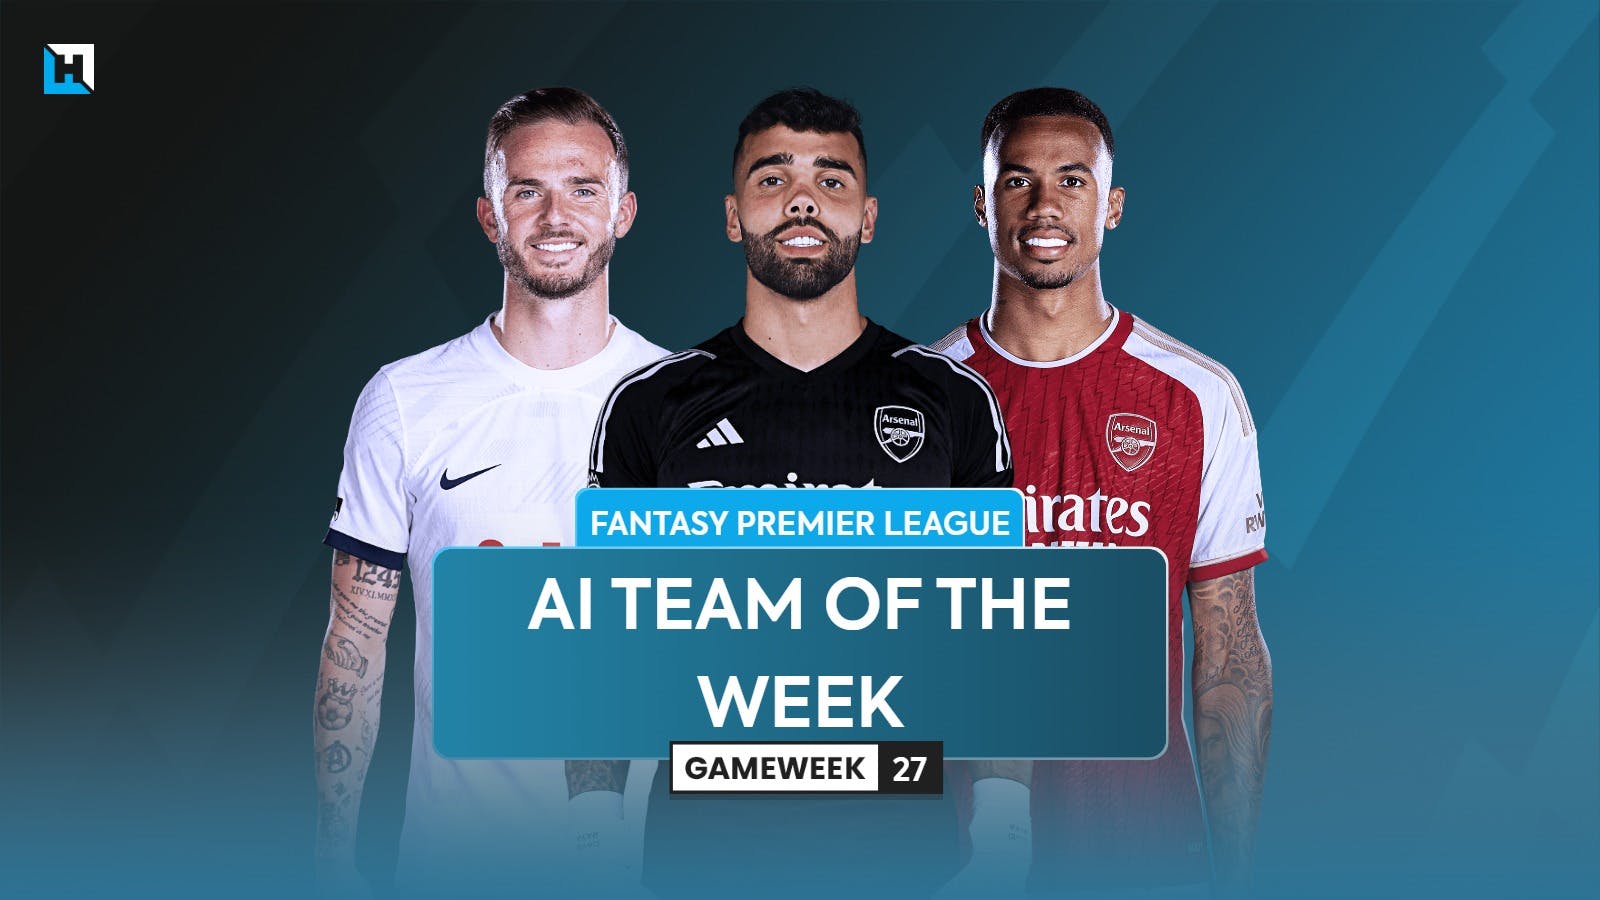 The best FPL team for Gameweek 27 according to Hub AI